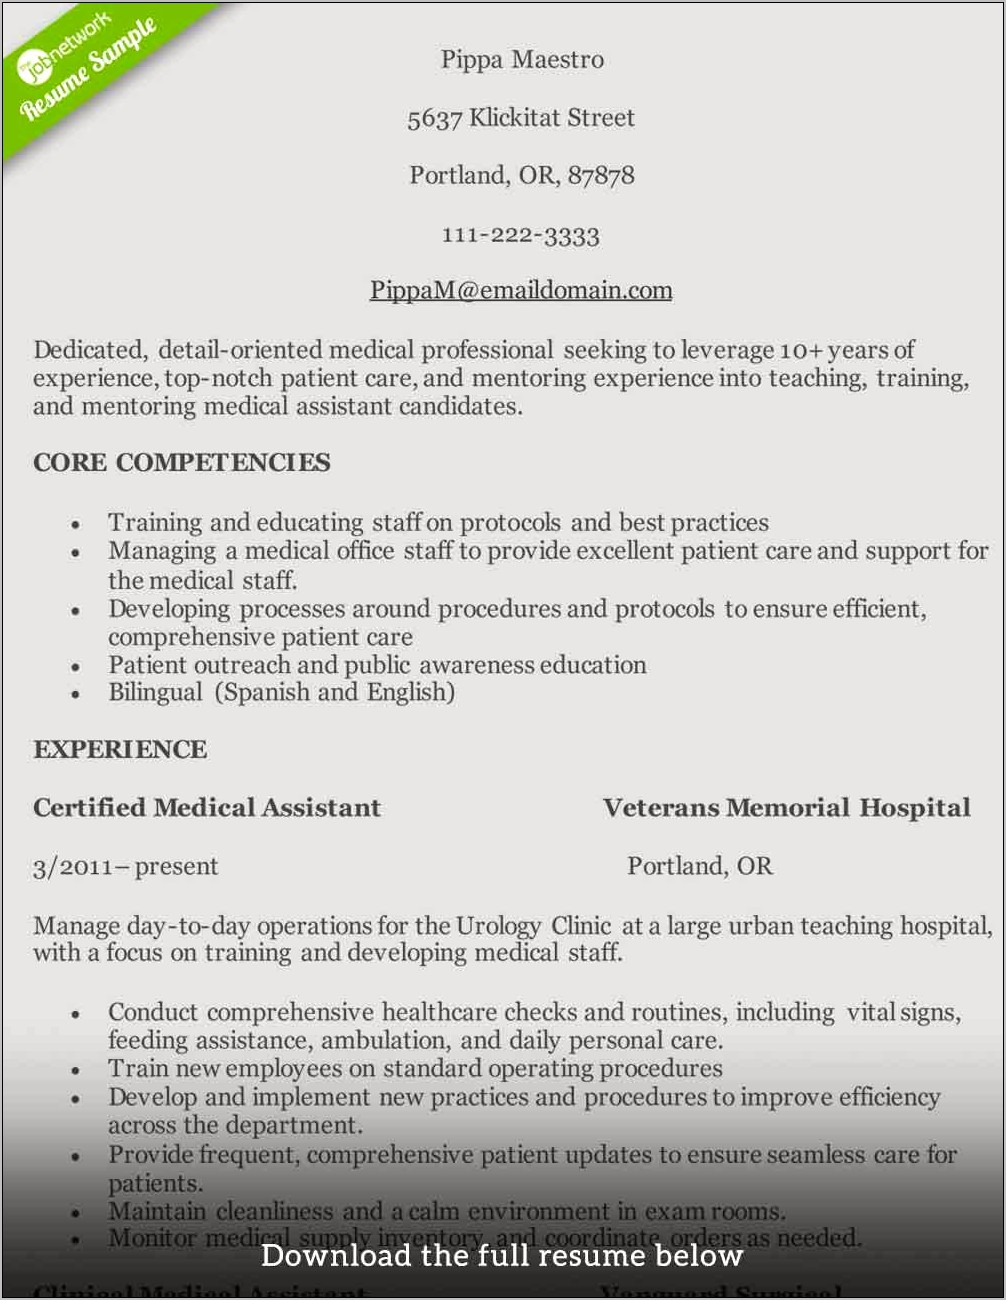 General Resume Objective Examples For Medical Assistant